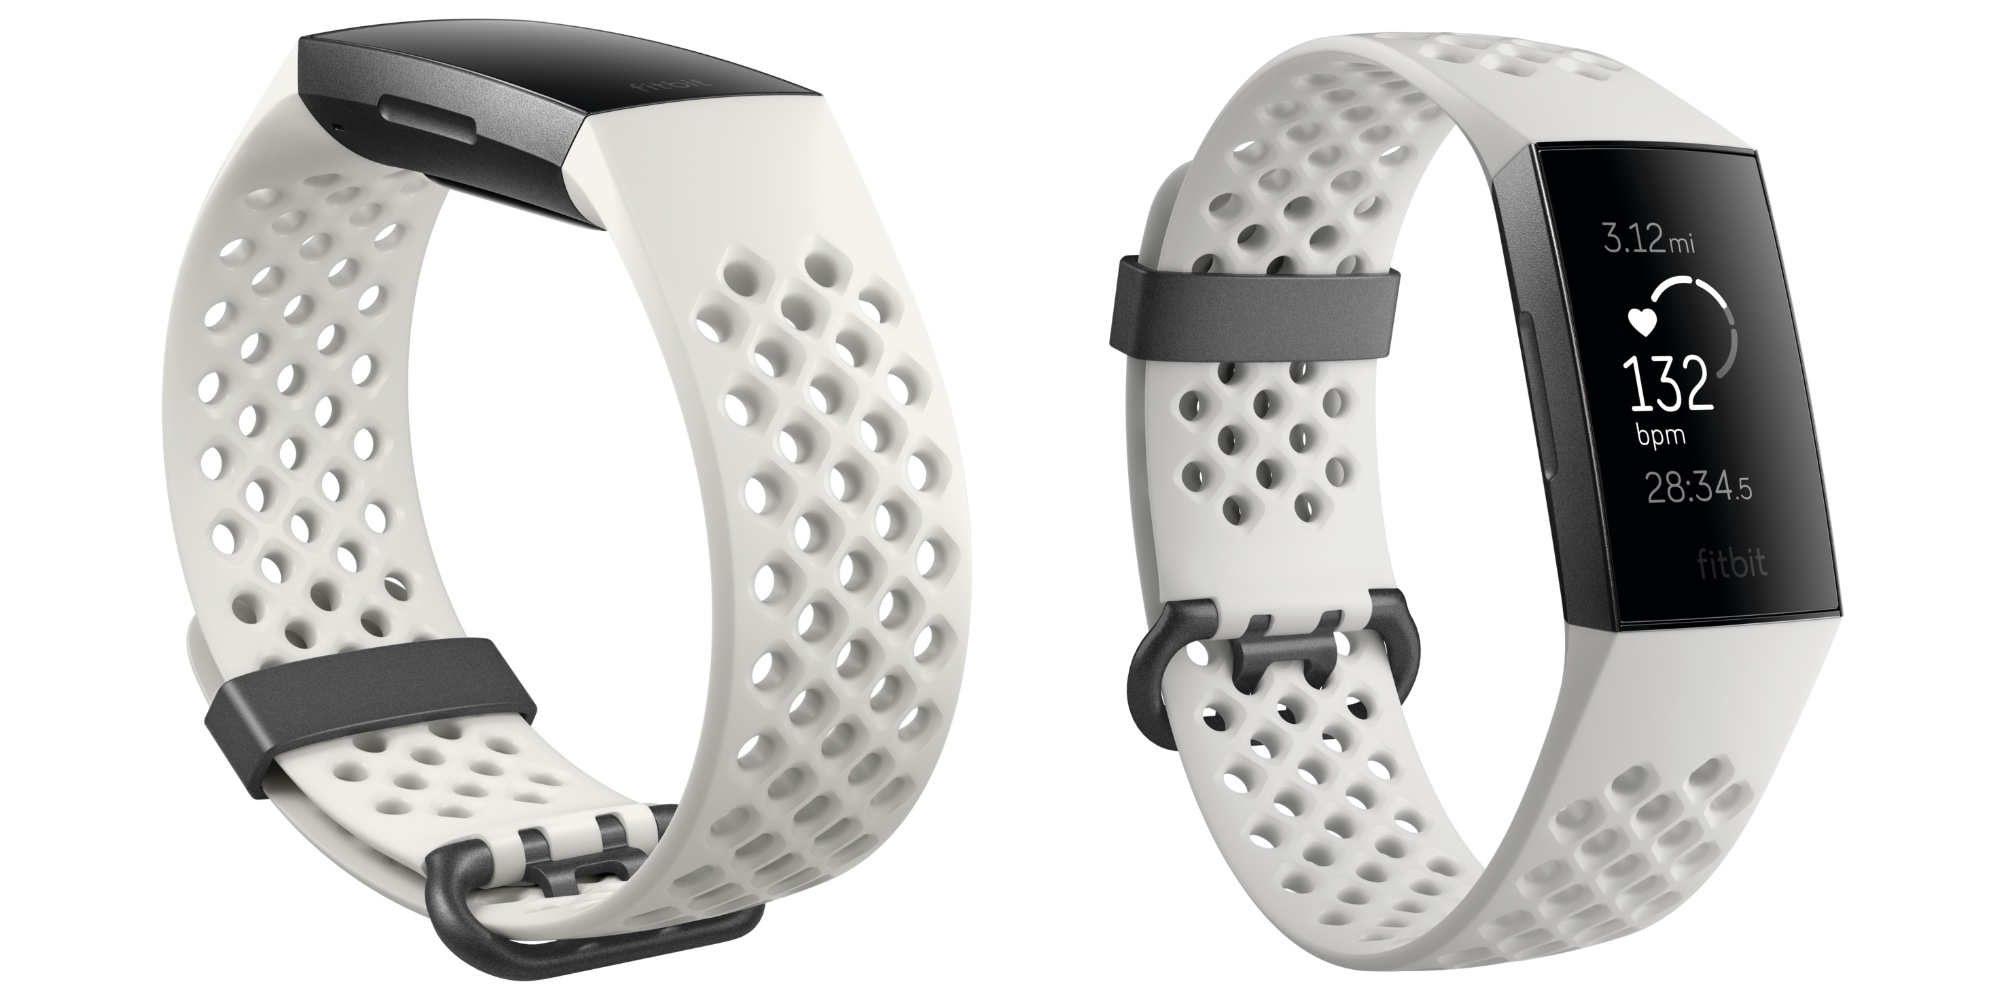 Meet your fitness goals with Fitbit's $129 Special Edition Charge 3